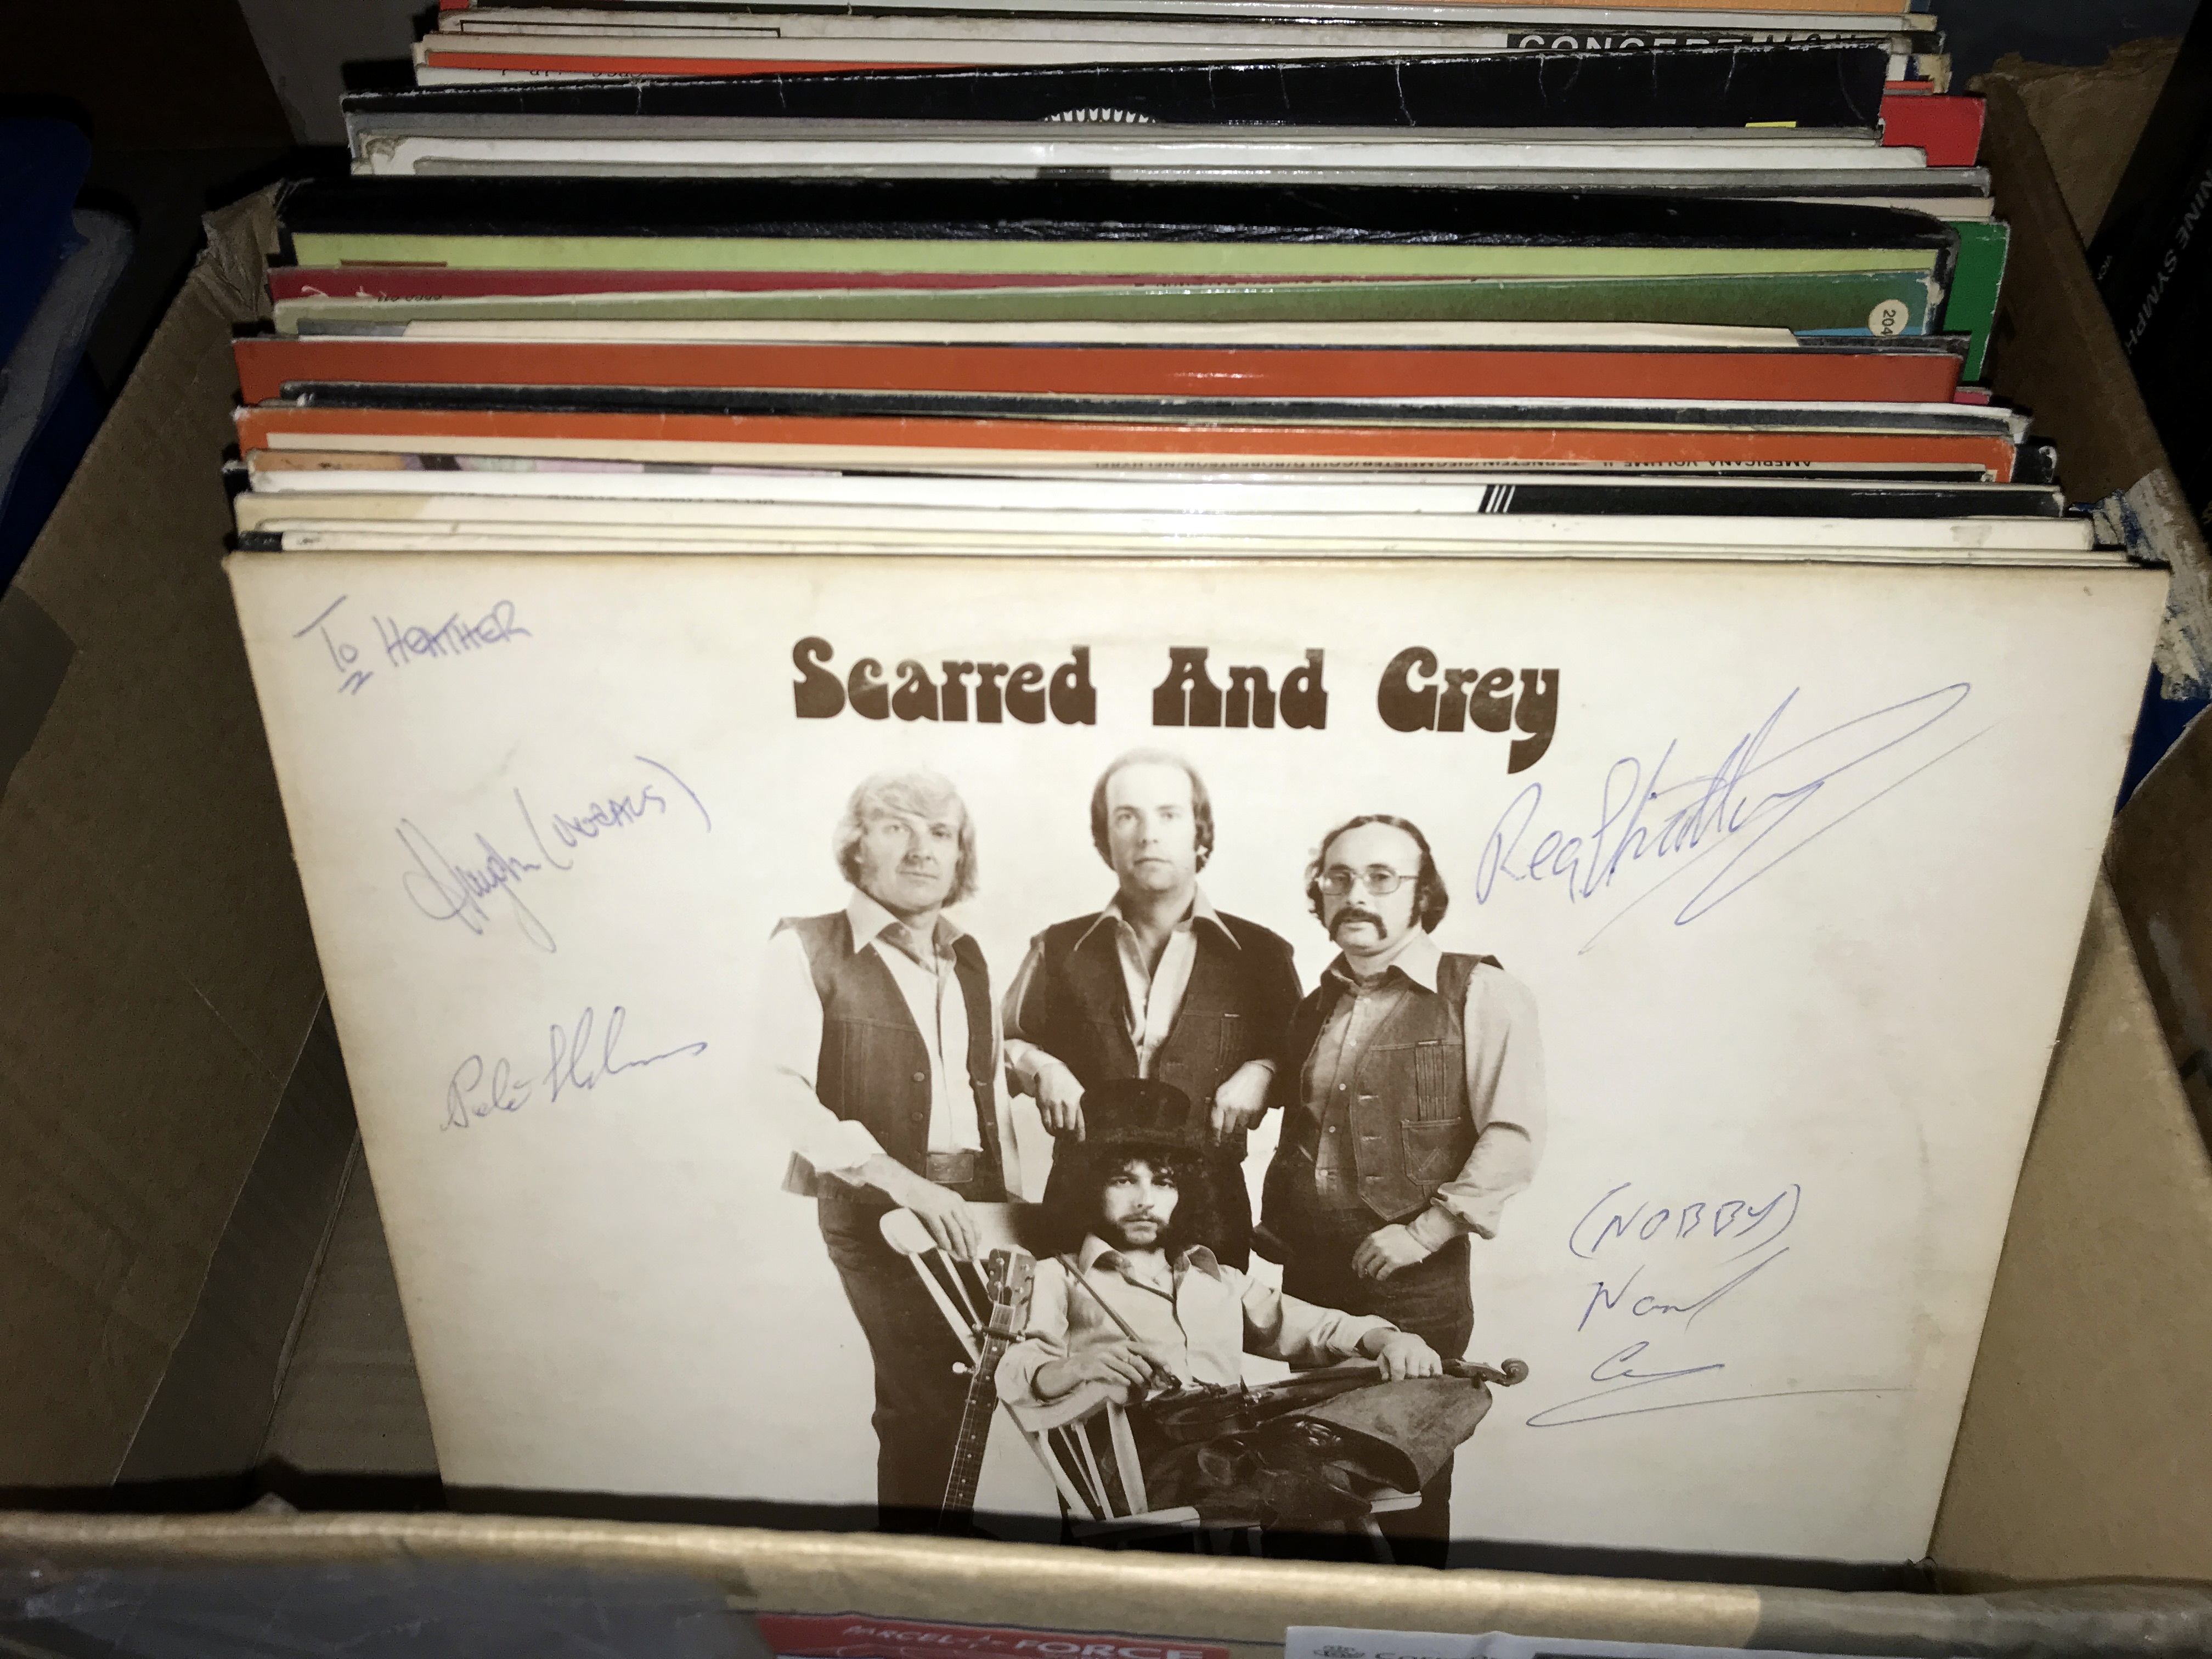 Over 150 classical LP records includes sxl wide band, asds, - Image 6 of 19